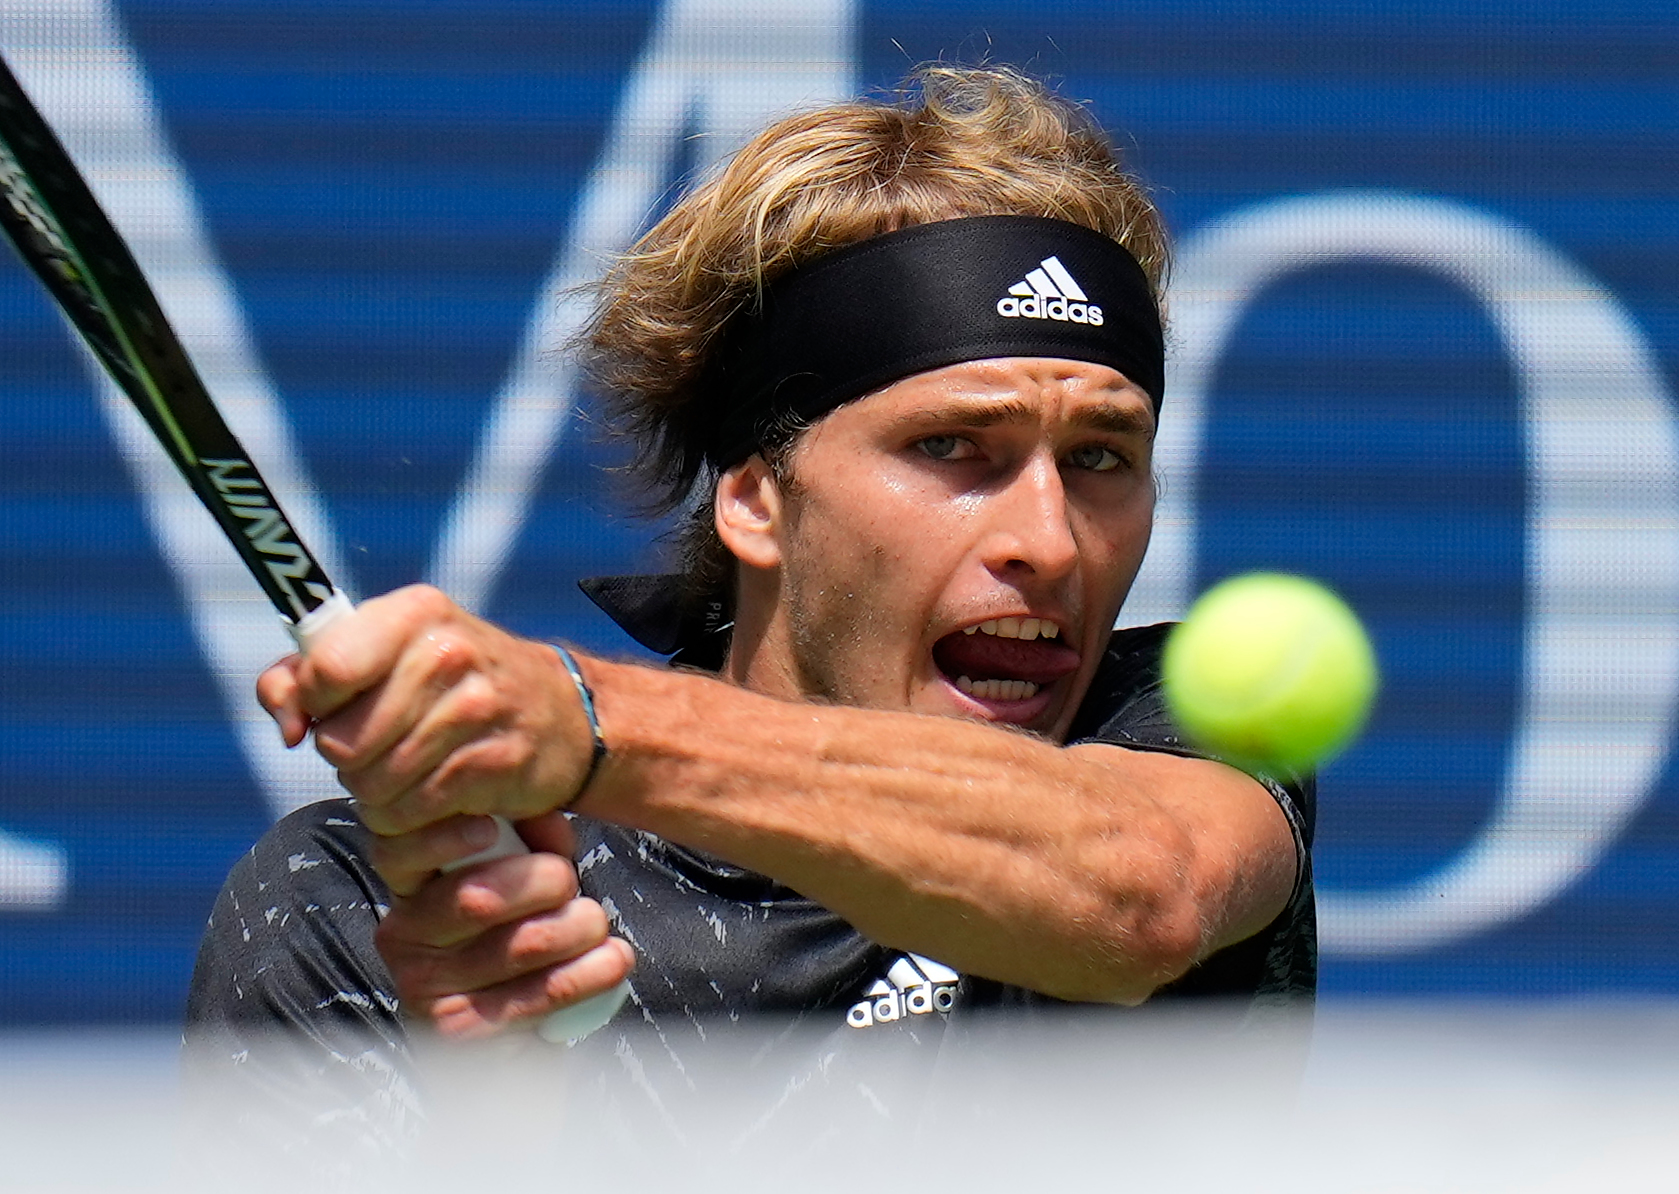 Alexander Zverev of Germany hits to Sam Querrey of the USA on day two of the 2021 U.S. Open tennis tournament at USTA Billie Jean King National Tennis Center. 